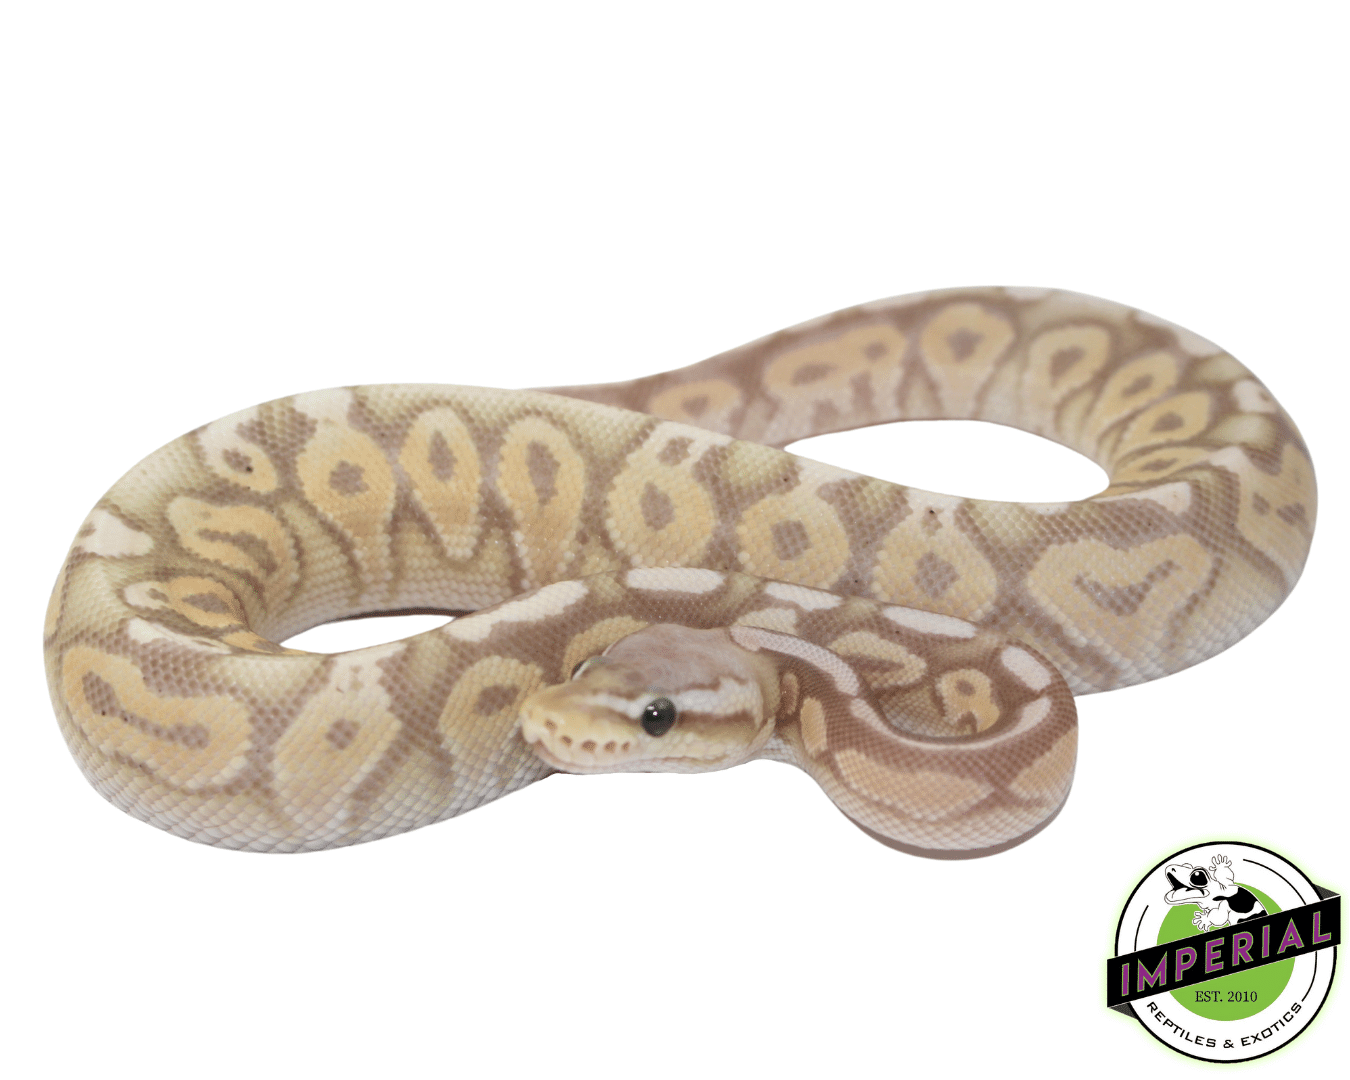 banana pewter ball python for sale, buy reptiles online